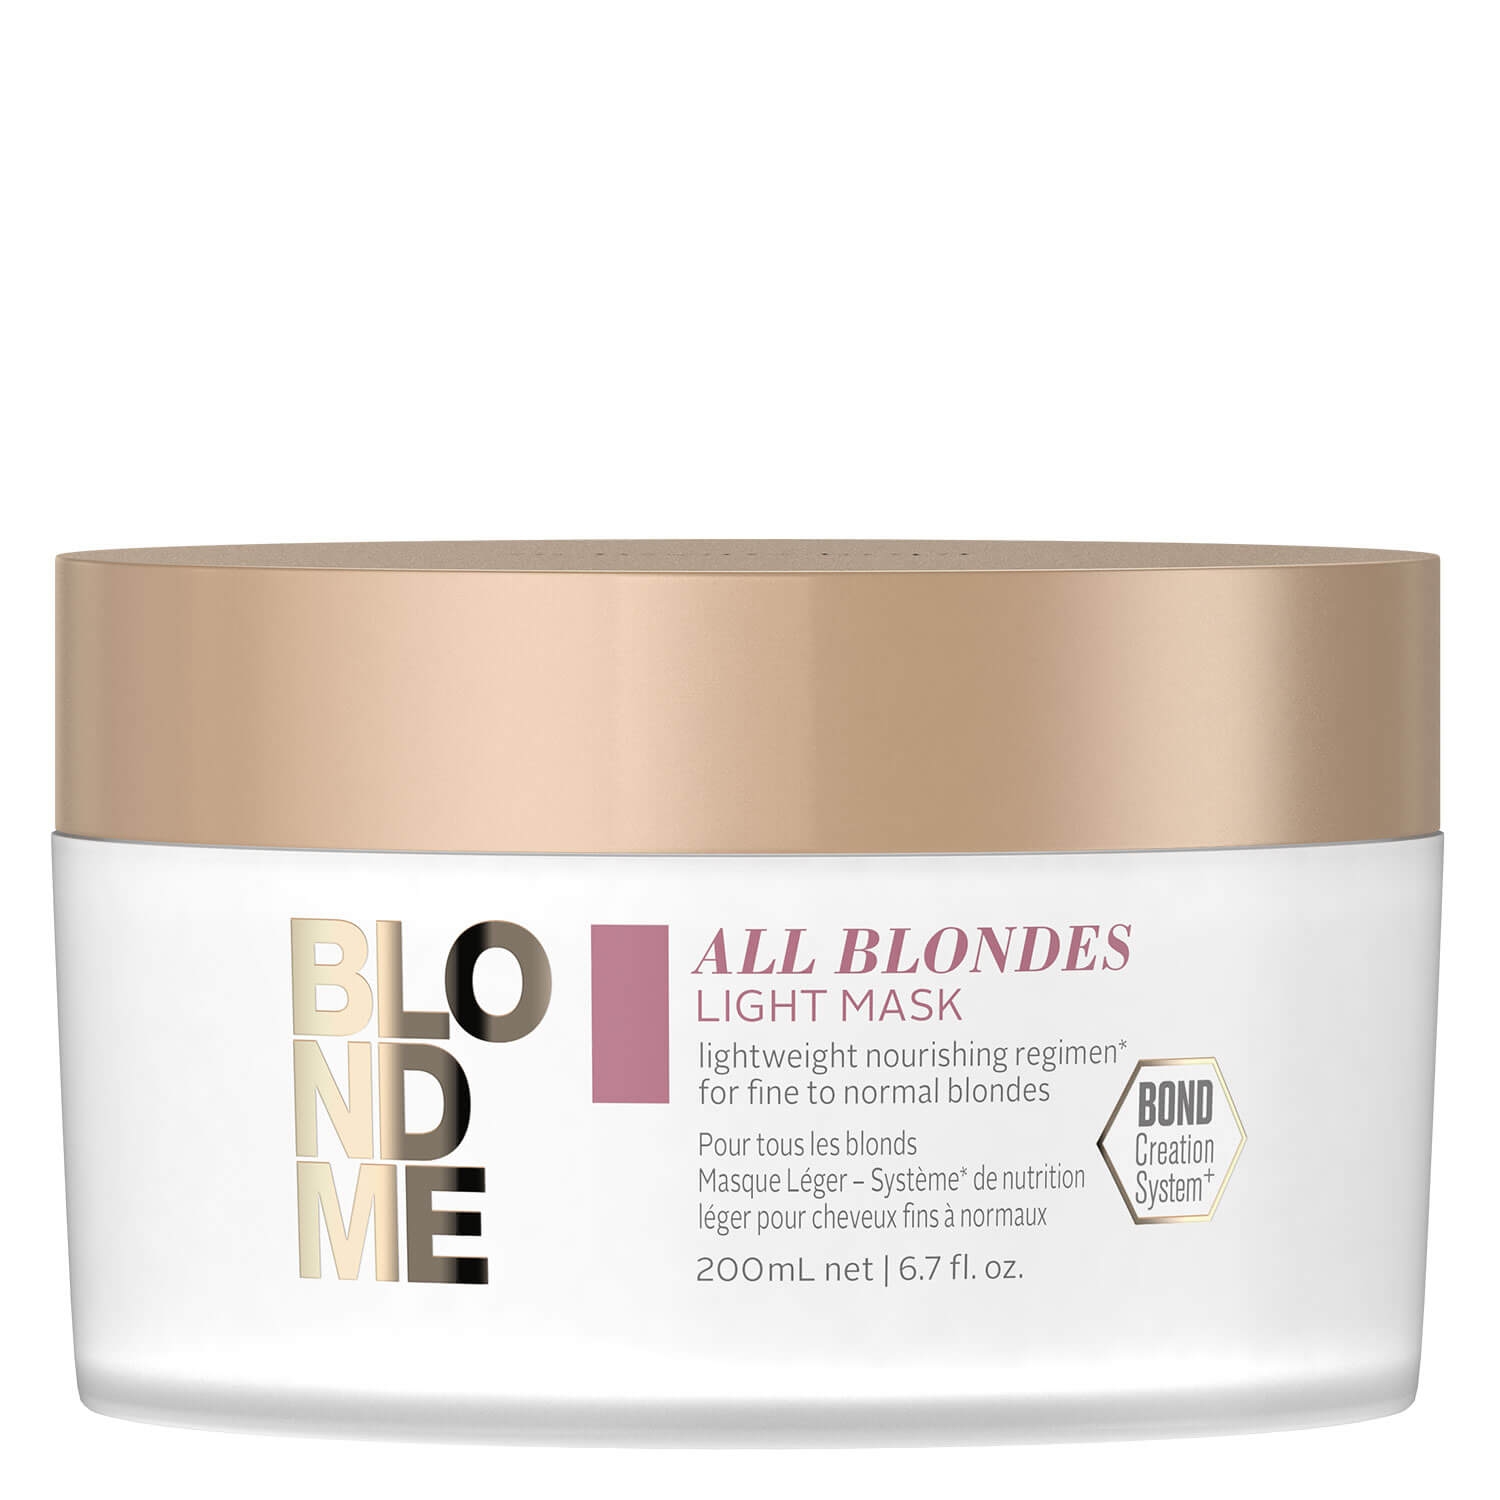 Product image from Blondme - All Blondes Light Mask